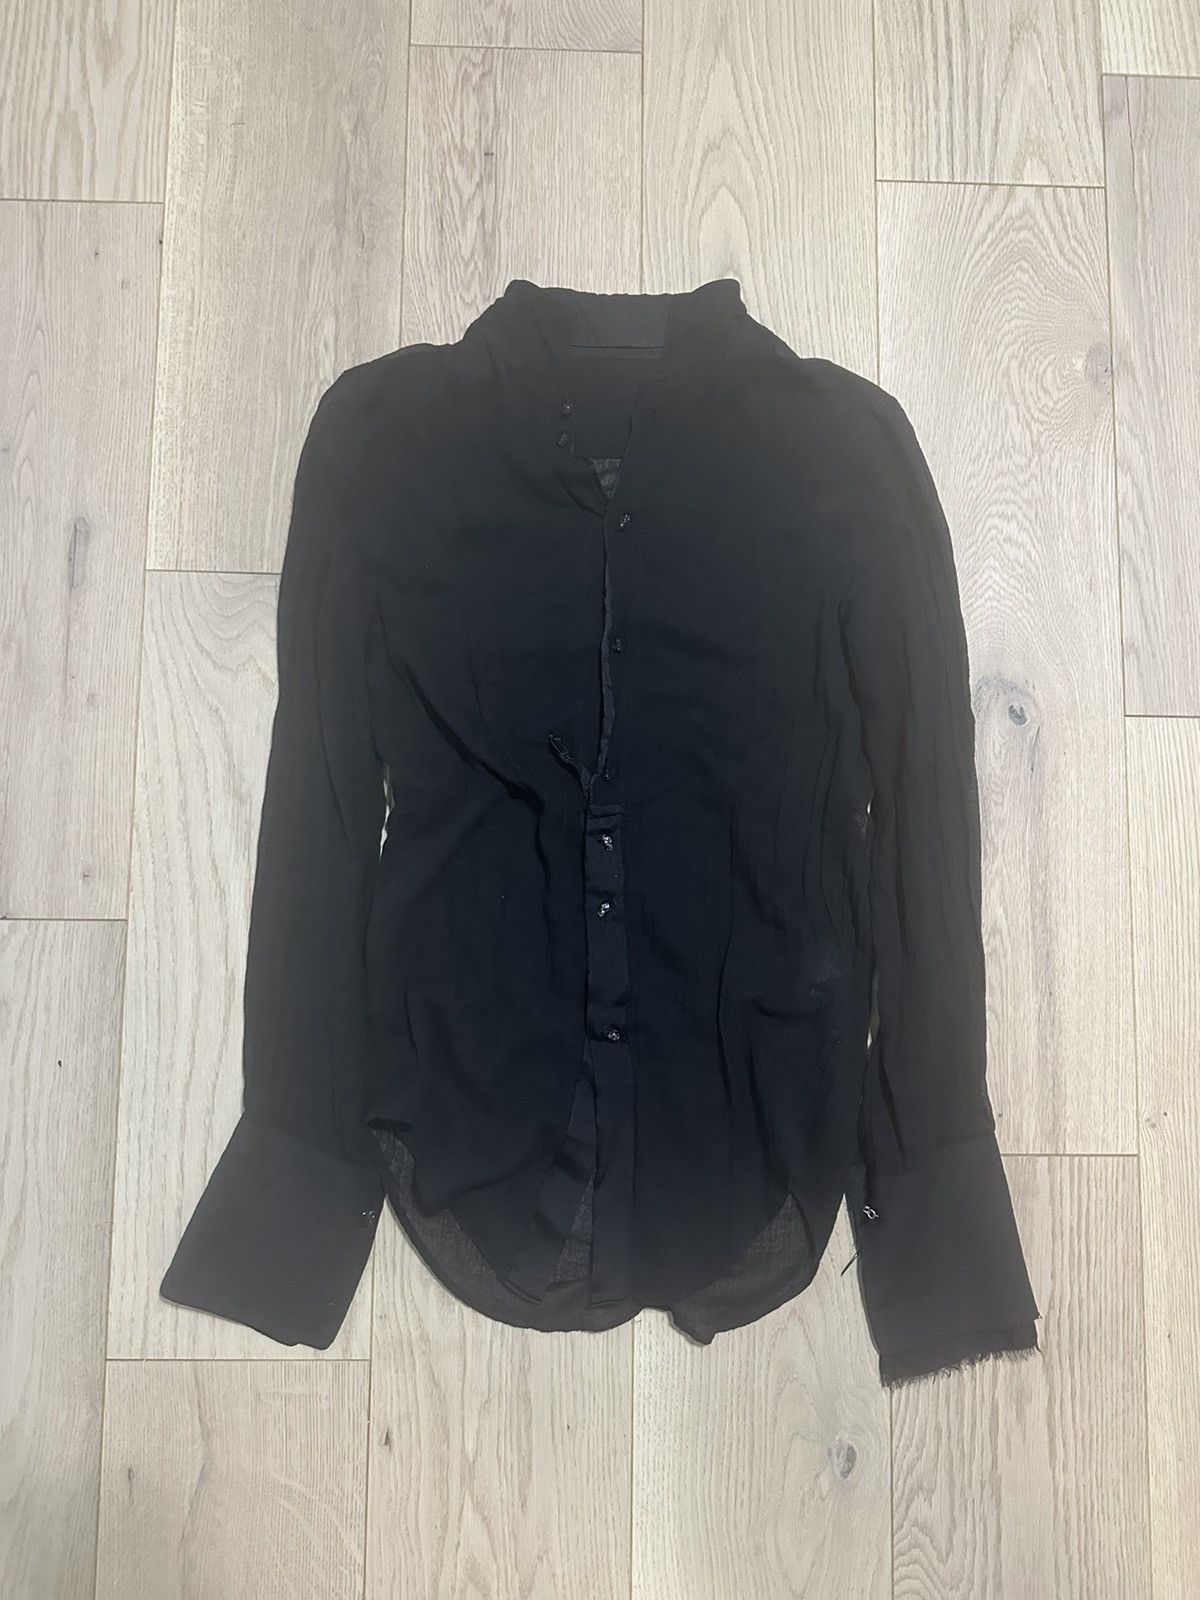 If Six Was Nine LGB/Ifsixwasnine TSX-4 button up | Grailed